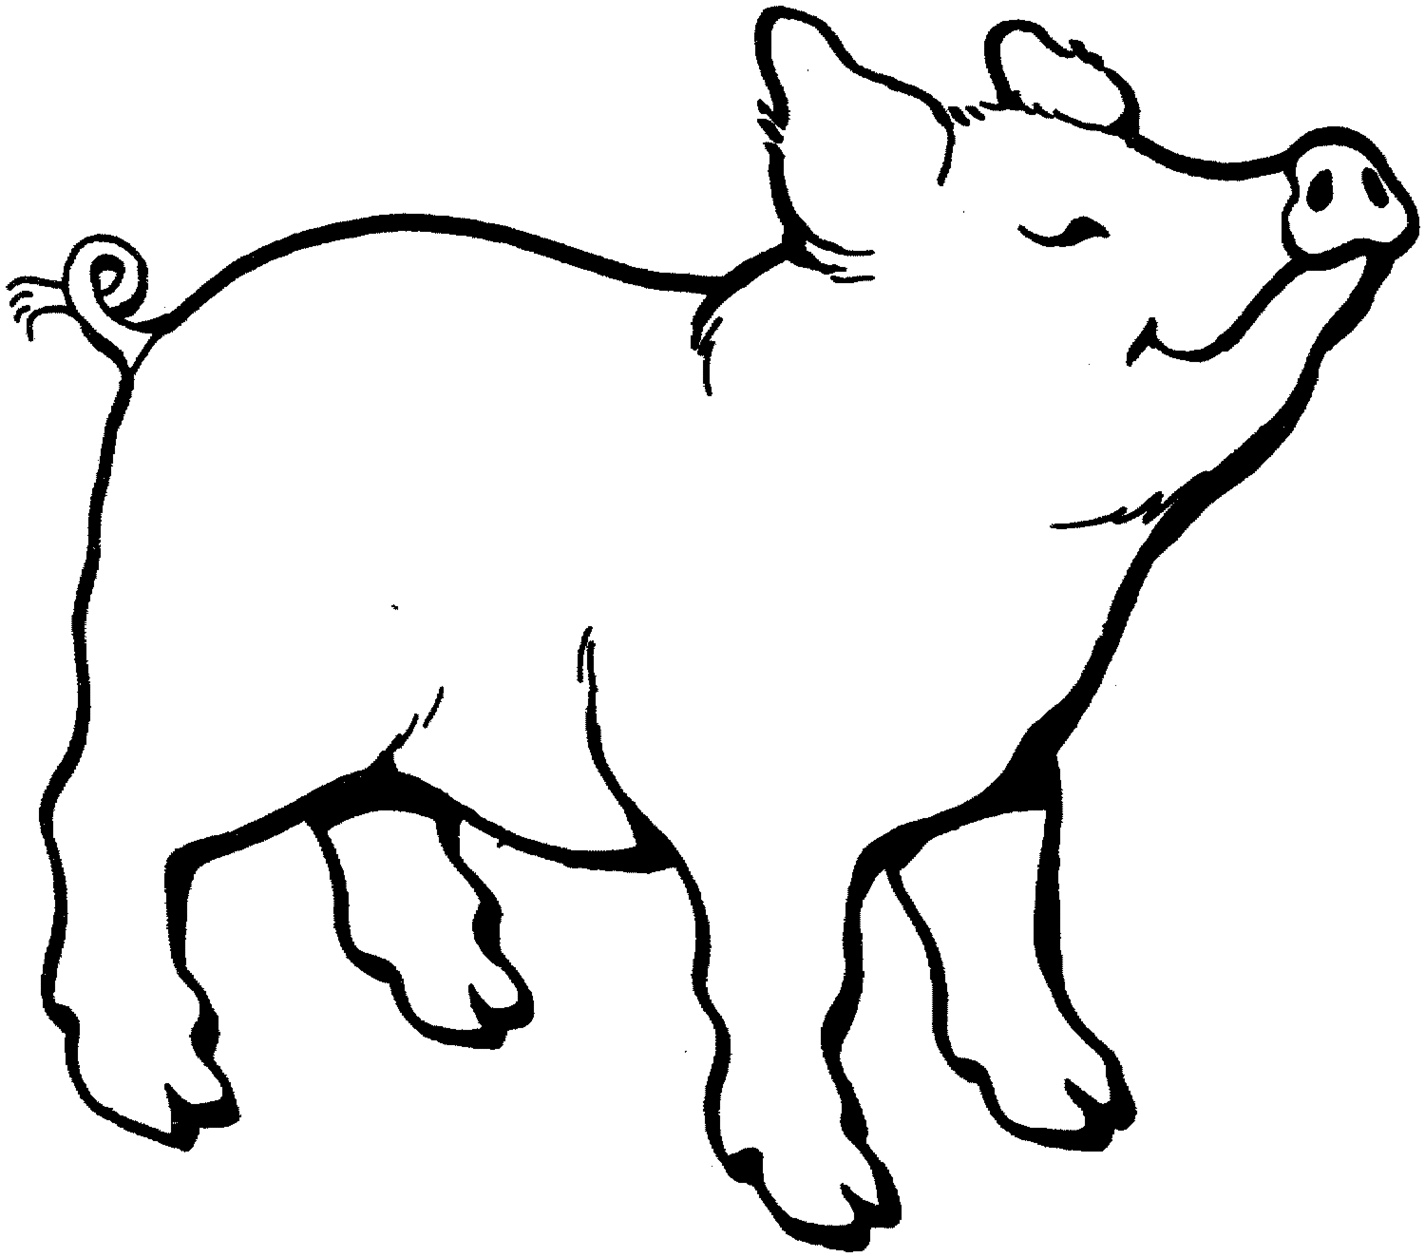 Black And White Cartoon Pig - ClipArt Best